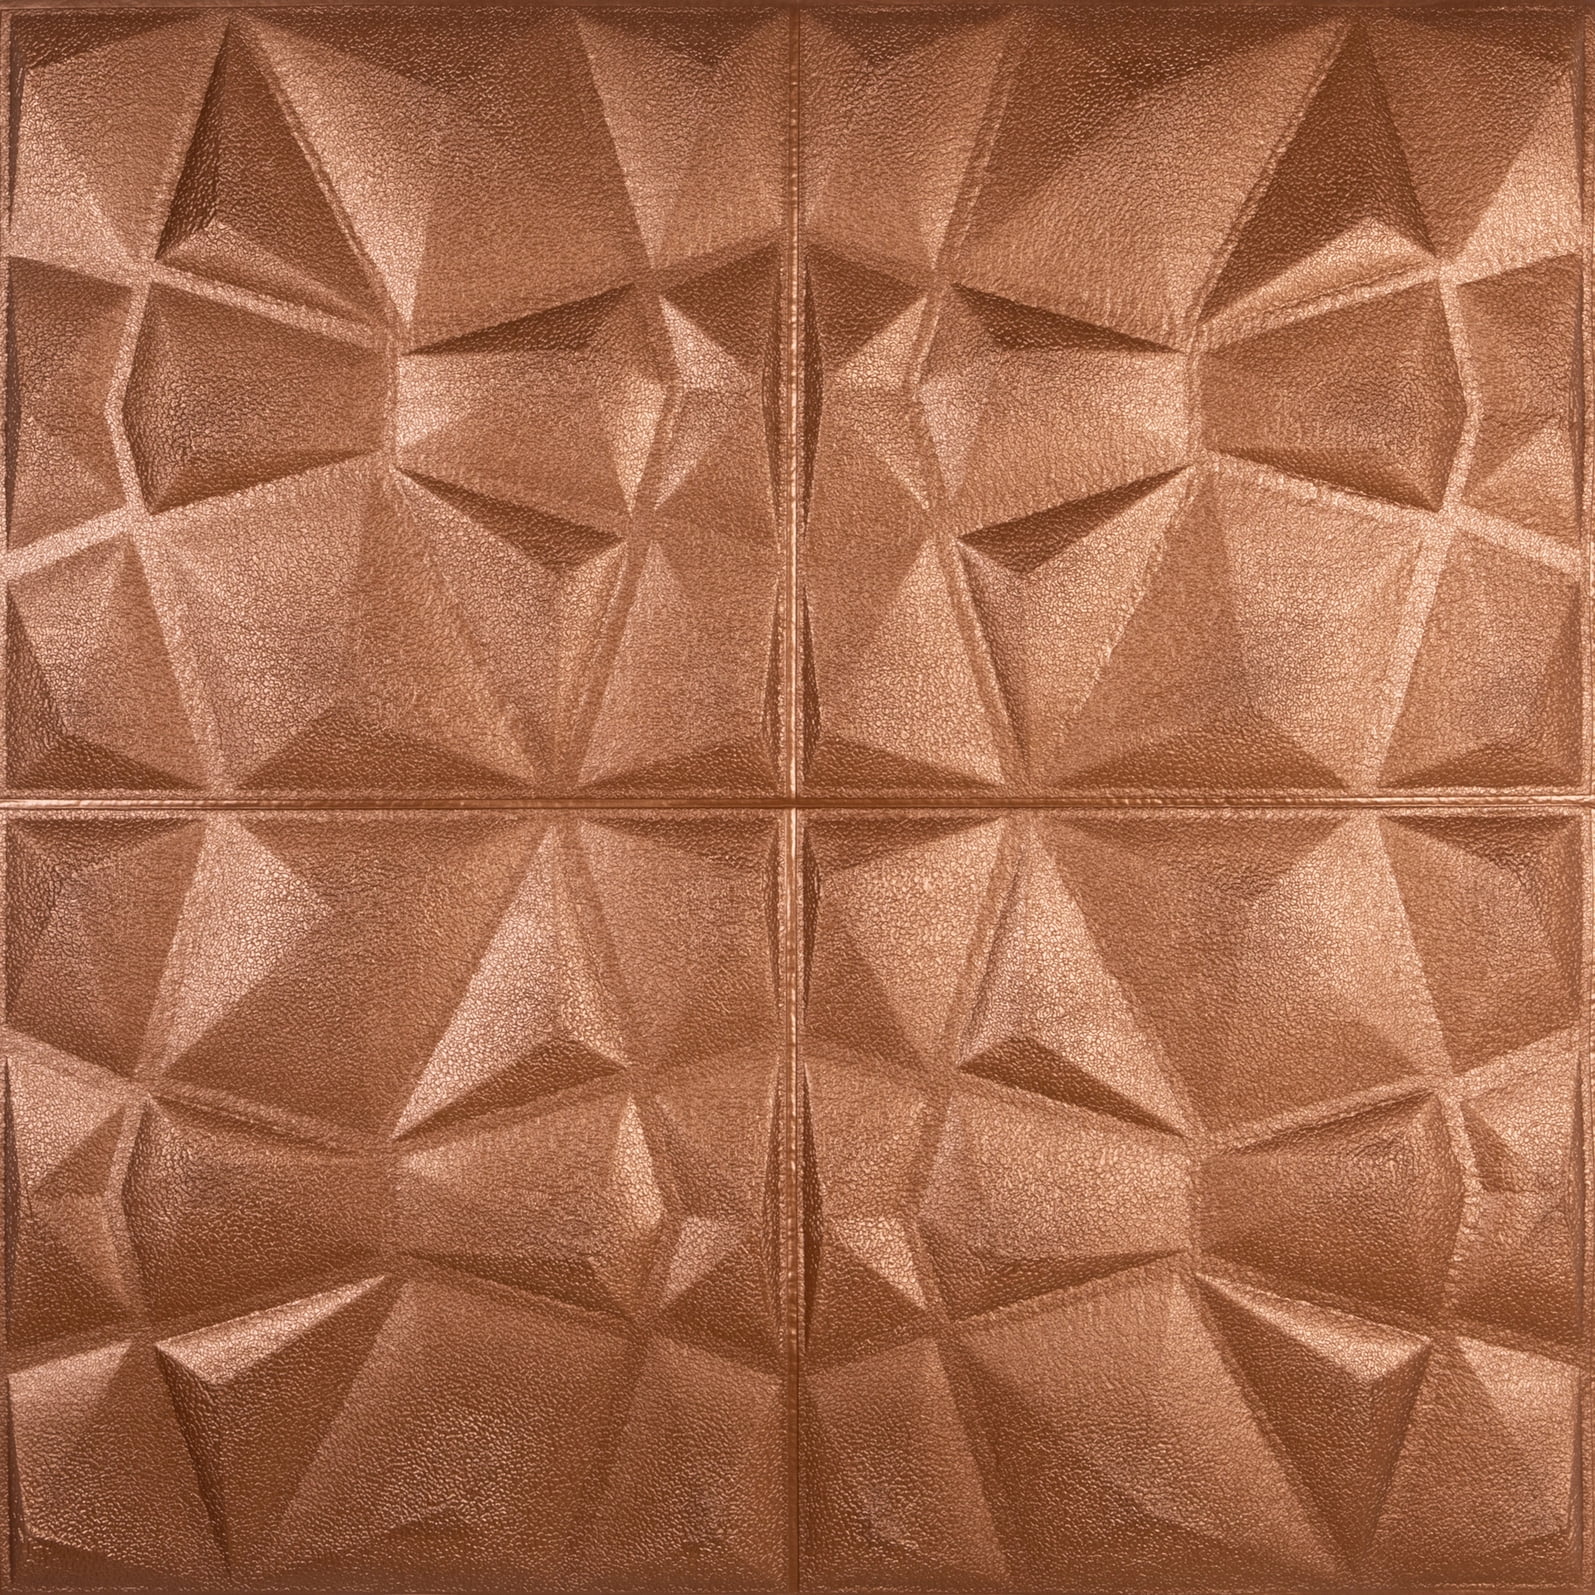 Dundee Deco S Copper Bronze Diamond 3d Wall Panel Peel And Stick Wall Sticker Self Adhesive